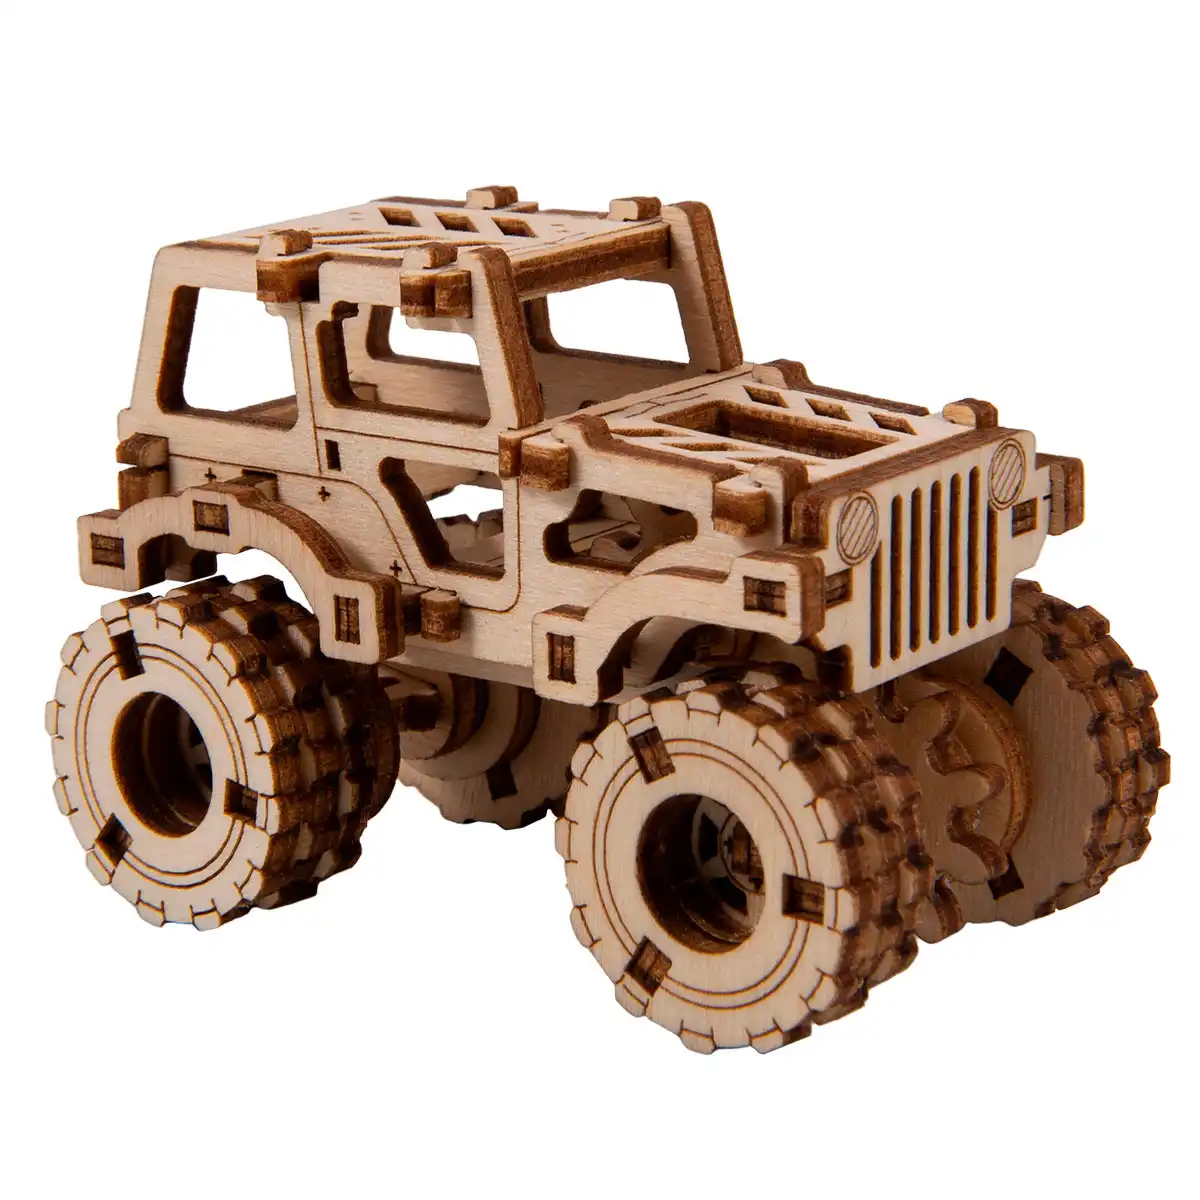  WOODEN.CITY - Wooden Truck Kit Model Cars to Build for Adults - Truck  Model Kits to Build for Adults - Car Model Kit Wooden 3D Puzzles for Adults  - Truck Puzzles